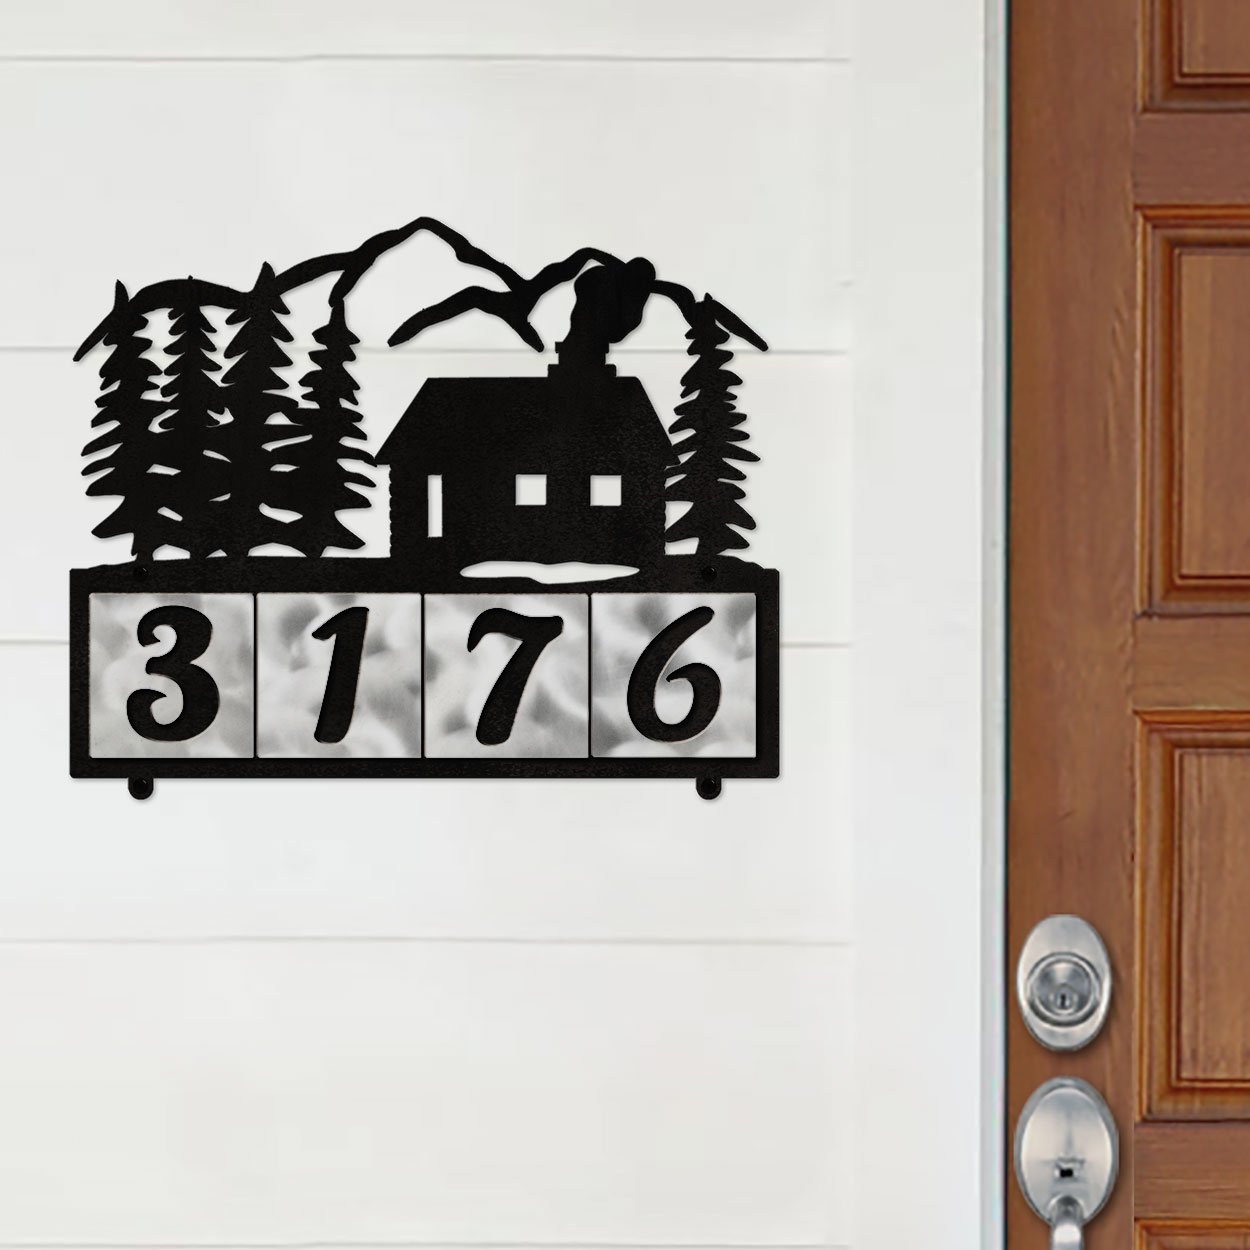 607074 - Cabin in the Woods Design 4-Digit Horizontal 4-inch Tile Outdoor House Numbers